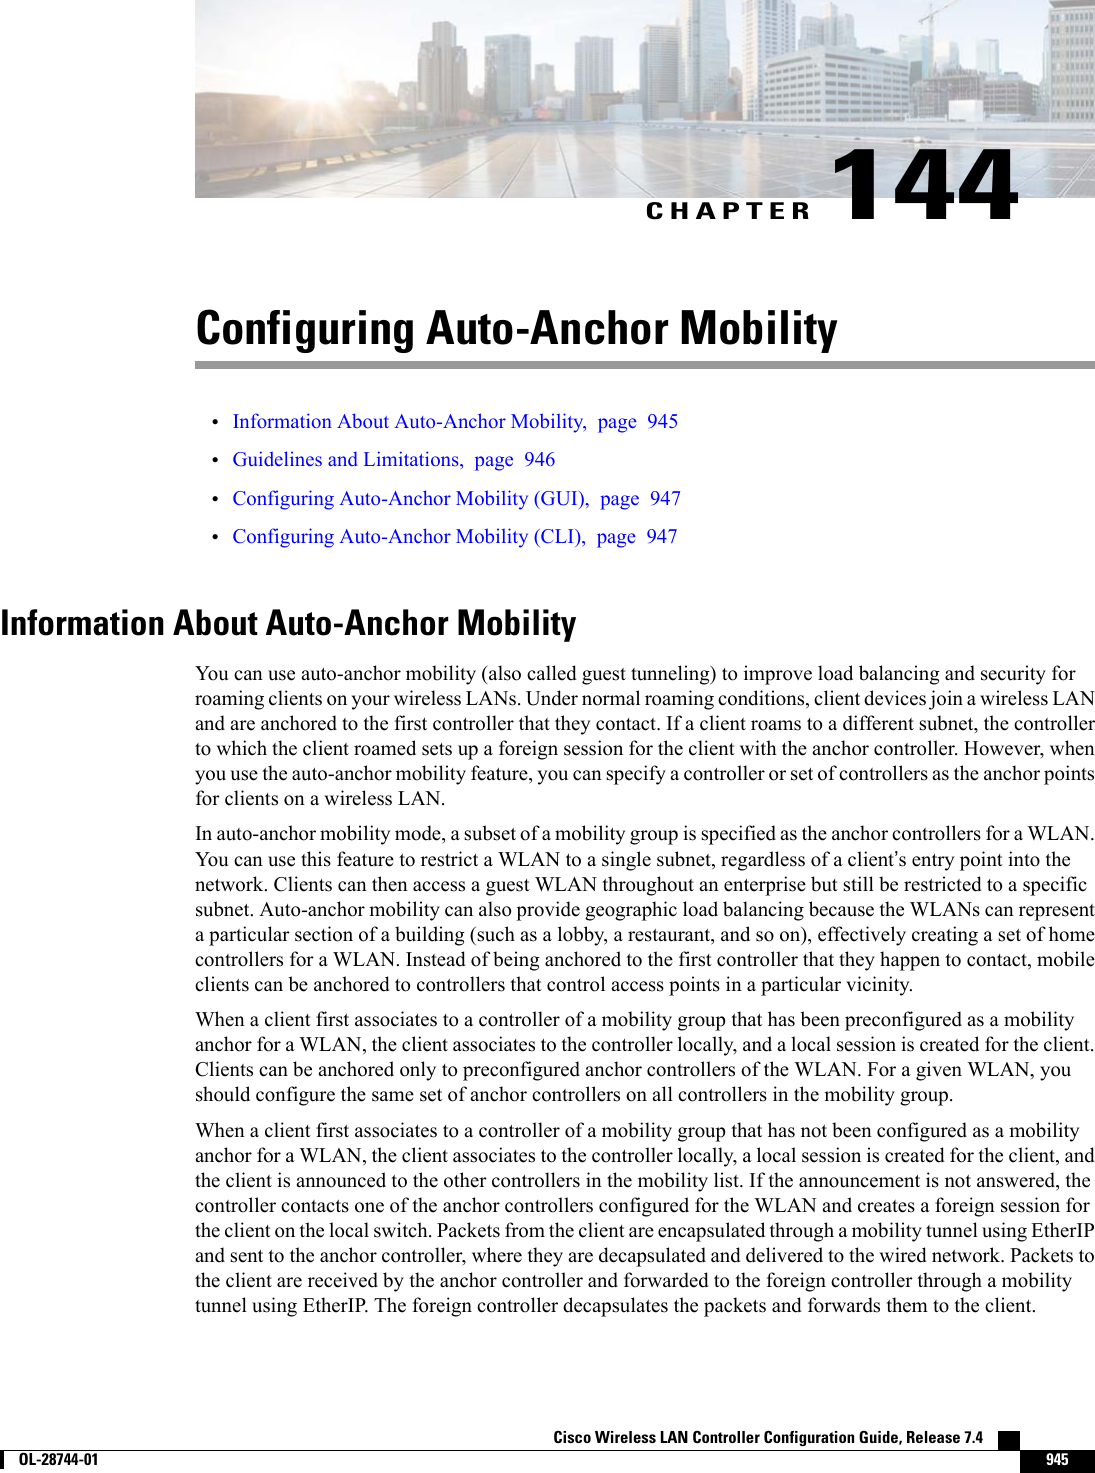 CHAPTER 144Configuring Auto-Anchor Mobility•Information About Auto-Anchor Mobility, page 945•Guidelines and Limitations, page 946•Configuring Auto-Anchor Mobility (GUI), page 947•Configuring Auto-Anchor Mobility (CLI), page 947Information About Auto-Anchor MobilityYou can use auto-anchor mobility (also called guest tunneling) to improve load balancing and security forroaming clients on your wireless LANs. Under normal roaming conditions, client devices join a wireless LANand are anchored to the first controller that they contact. If a client roams to a different subnet, the controllerto which the client roamed sets up a foreign session for the client with the anchor controller. However, whenyou use the auto-anchor mobility feature, you can specify a controller or set of controllers as the anchor pointsfor clients on a wireless LAN.In auto-anchor mobility mode, a subset of a mobility group is specified as the anchor controllers for a WLAN.You can use this feature to restrict a WLAN to a single subnet, regardless of a client’s entry point into thenetwork. Clients can then access a guest WLAN throughout an enterprise but still be restricted to a specificsubnet. Auto-anchor mobility can also provide geographic load balancing because the WLANs can representa particular section of a building (such as a lobby, a restaurant, and so on), effectively creating a set of homecontrollers for a WLAN. Instead of being anchored to the first controller that they happen to contact, mobileclients can be anchored to controllers that control access points in a particular vicinity.When a client first associates to a controller of a mobility group that has been preconfigured as a mobilityanchor for a WLAN, the client associates to the controller locally, and a local session is created for the client.Clients can be anchored only to preconfigured anchor controllers of the WLAN. For a given WLAN, youshould configure the same set of anchor controllers on all controllers in the mobility group.When a client first associates to a controller of a mobility group that has not been configured as a mobilityanchor for a WLAN, the client associates to the controller locally, a local session is created for the client, andthe client is announced to the other controllers in the mobility list. If the announcement is not answered, thecontroller contacts one of the anchor controllers configured for the WLAN and creates a foreign session forthe client on the local switch. Packets from the client are encapsulated through a mobility tunnel using EtherIPand sent to the anchor controller, where they are decapsulated and delivered to the wired network. Packets tothe client are received by the anchor controller and forwarded to the foreign controller through a mobilitytunnel using EtherIP. The foreign controller decapsulates the packets and forwards them to the client.Cisco Wireless LAN Controller Configuration Guide, Release 7.4        OL-28744-01 945